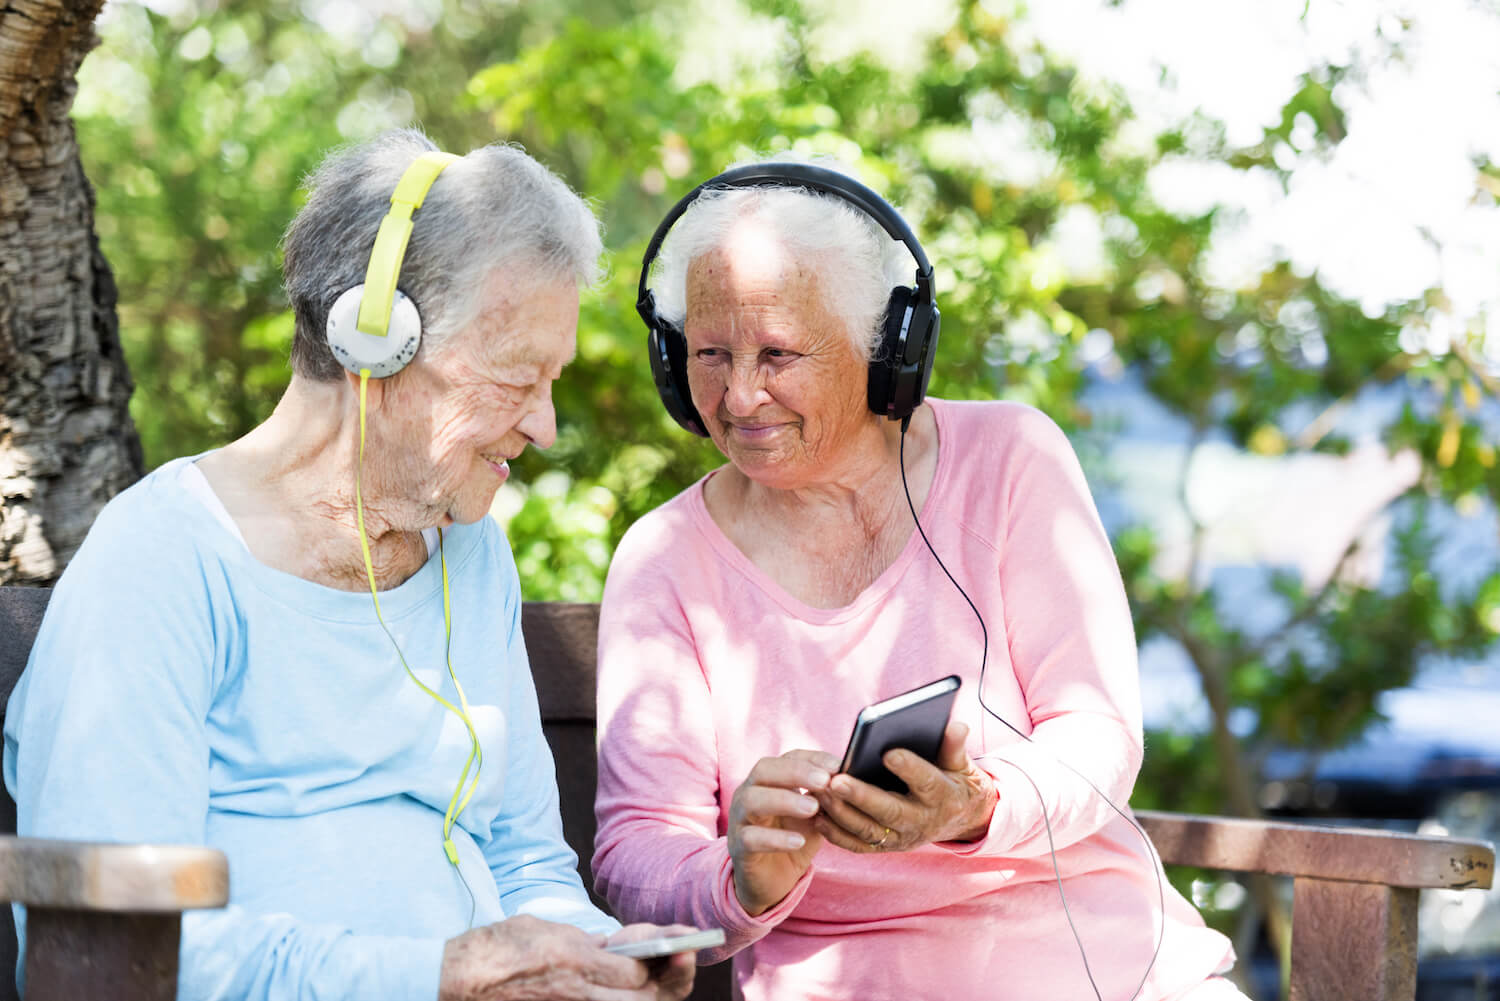 Two senior women listening to music on headphones together as they sit on a bench in the park